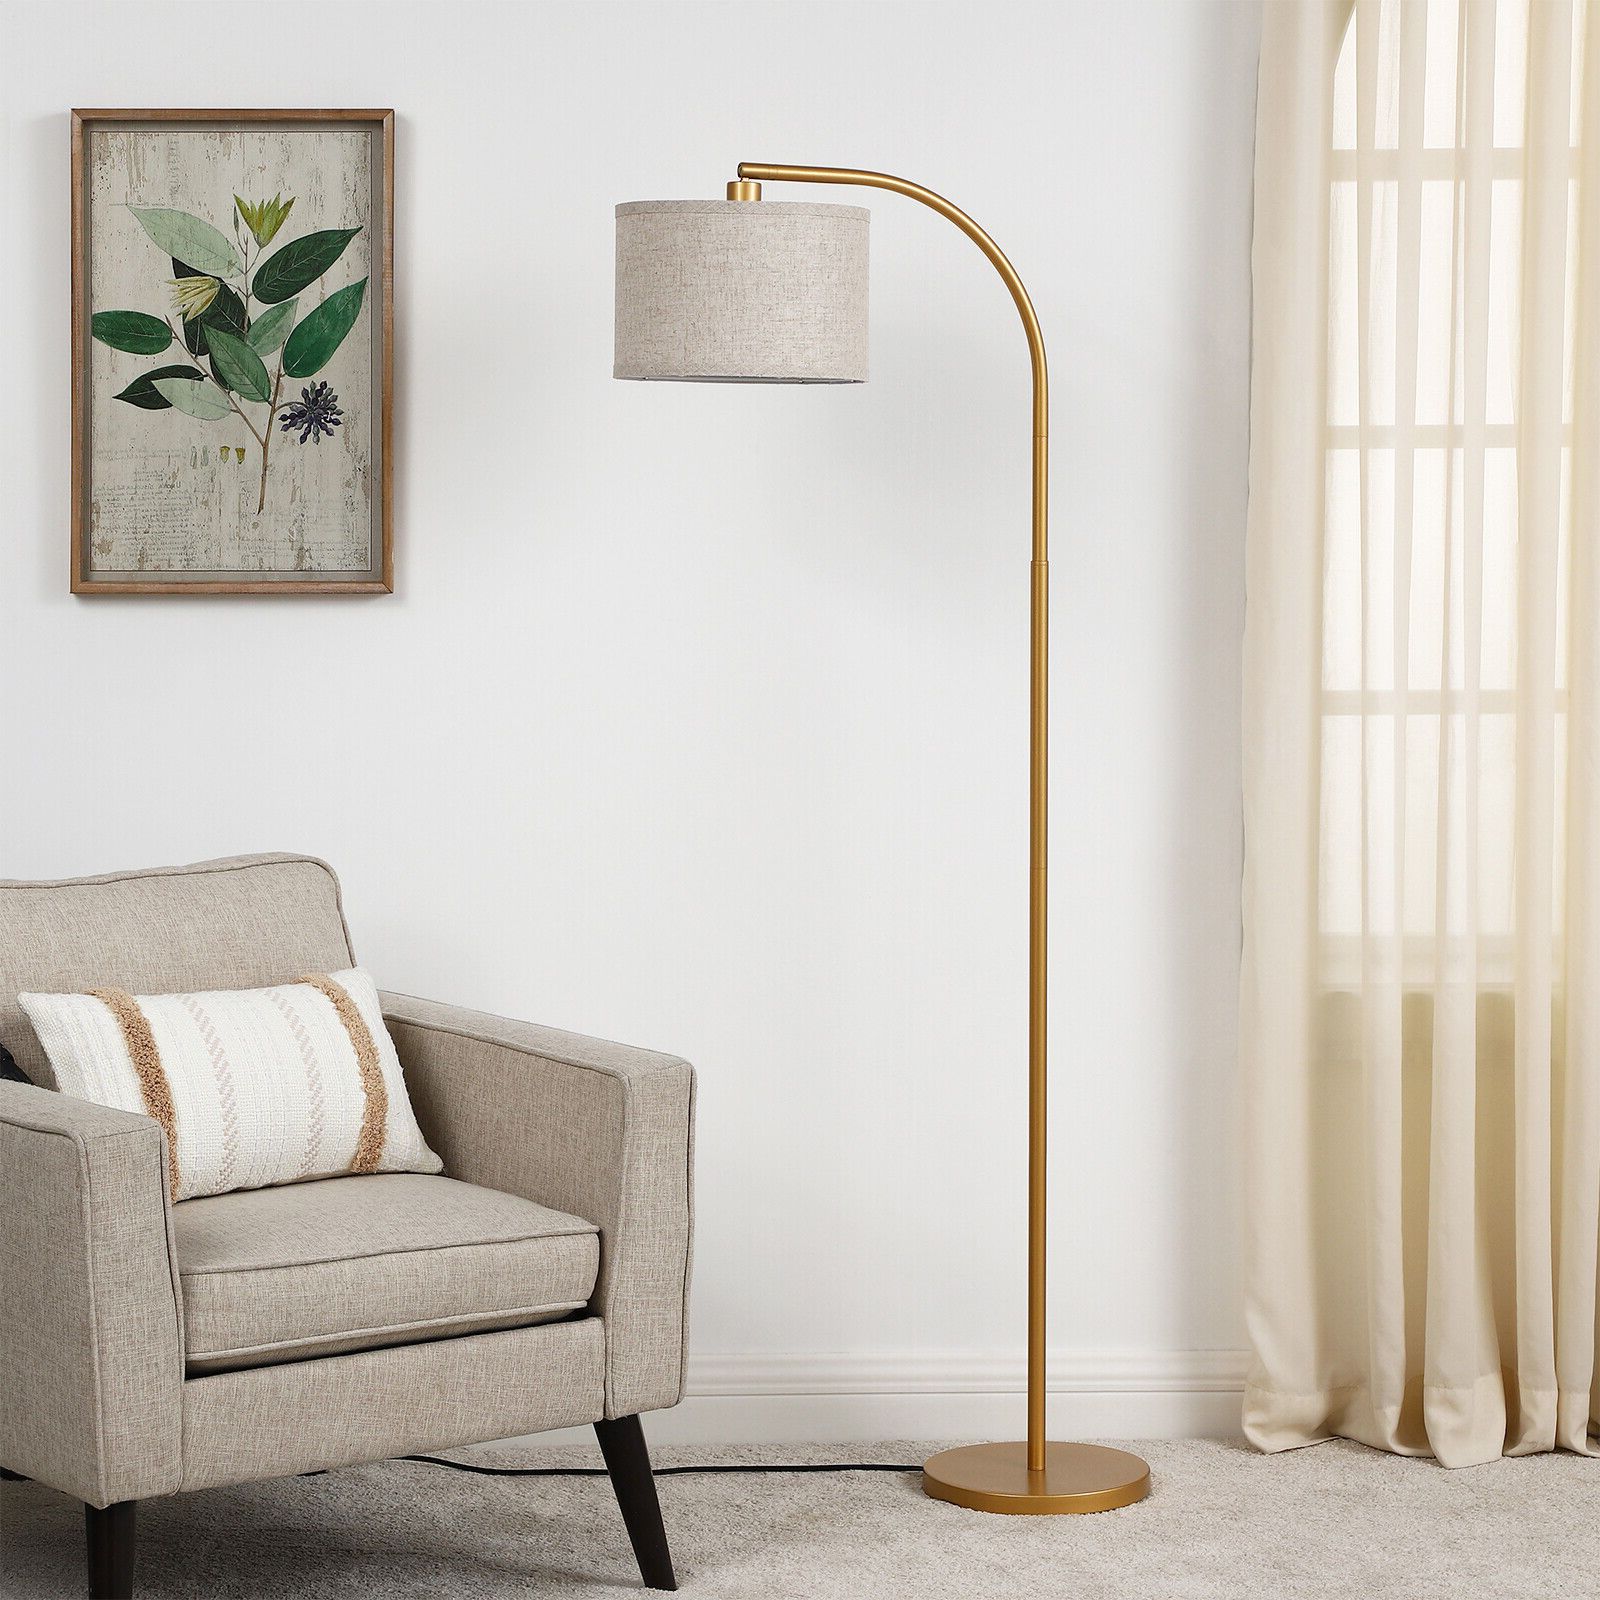 Dewenwils Modern Arched Floor Lamps Adjustable Gold Standing Tall Arc Lamp  | Ebay With Regard To Gold Floor Lamps (View 2 of 20)